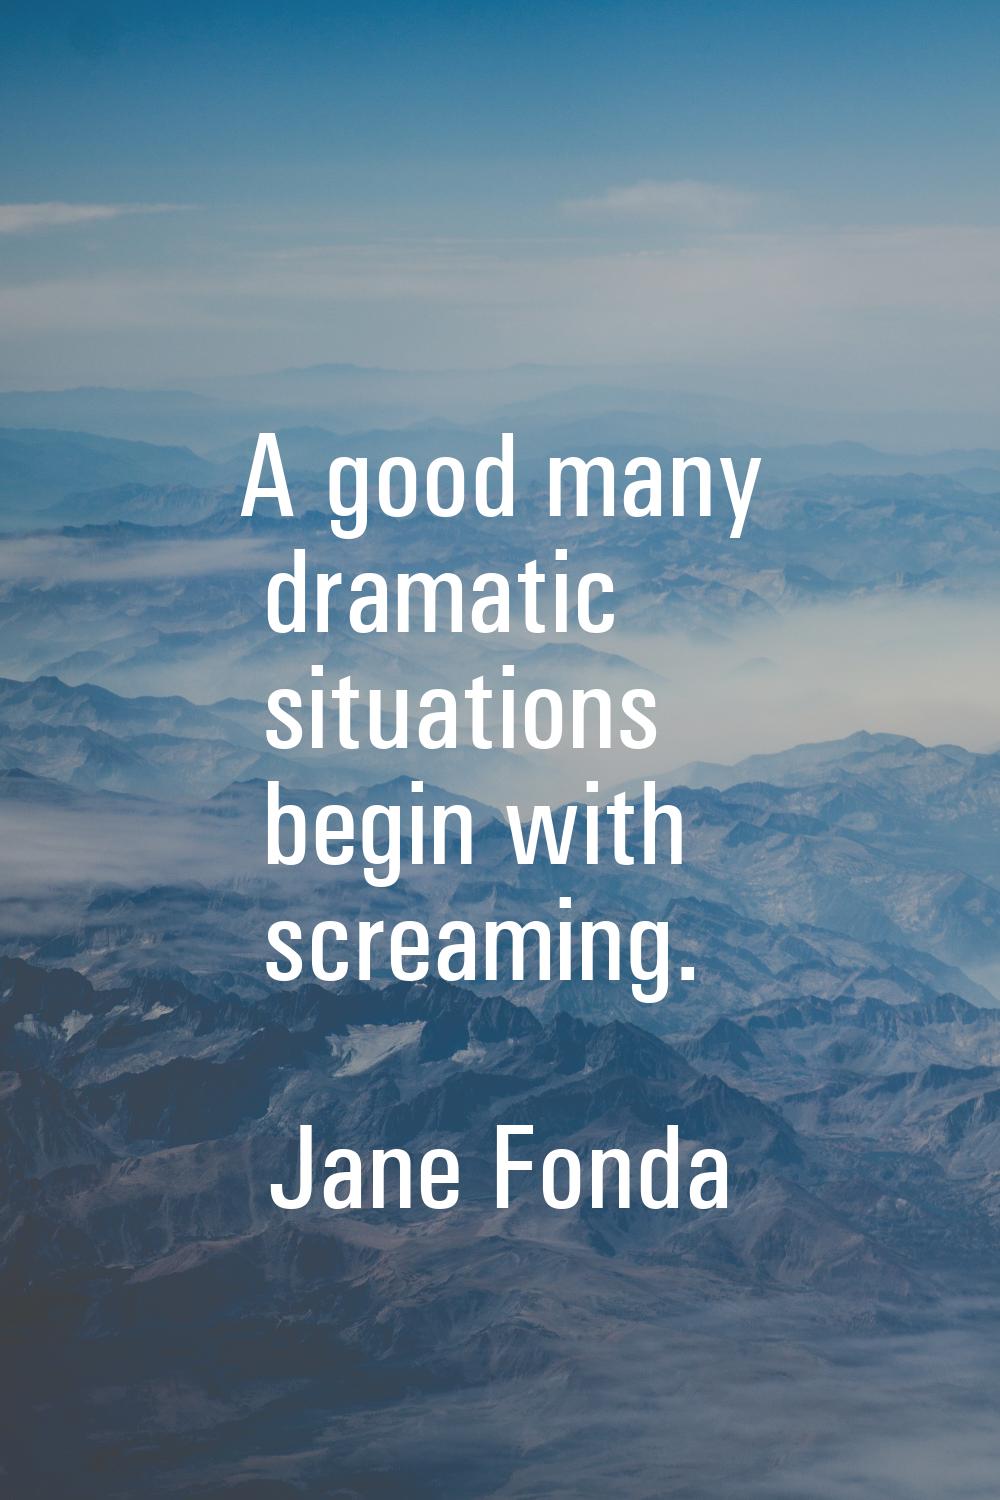 A good many dramatic situations begin with screaming.